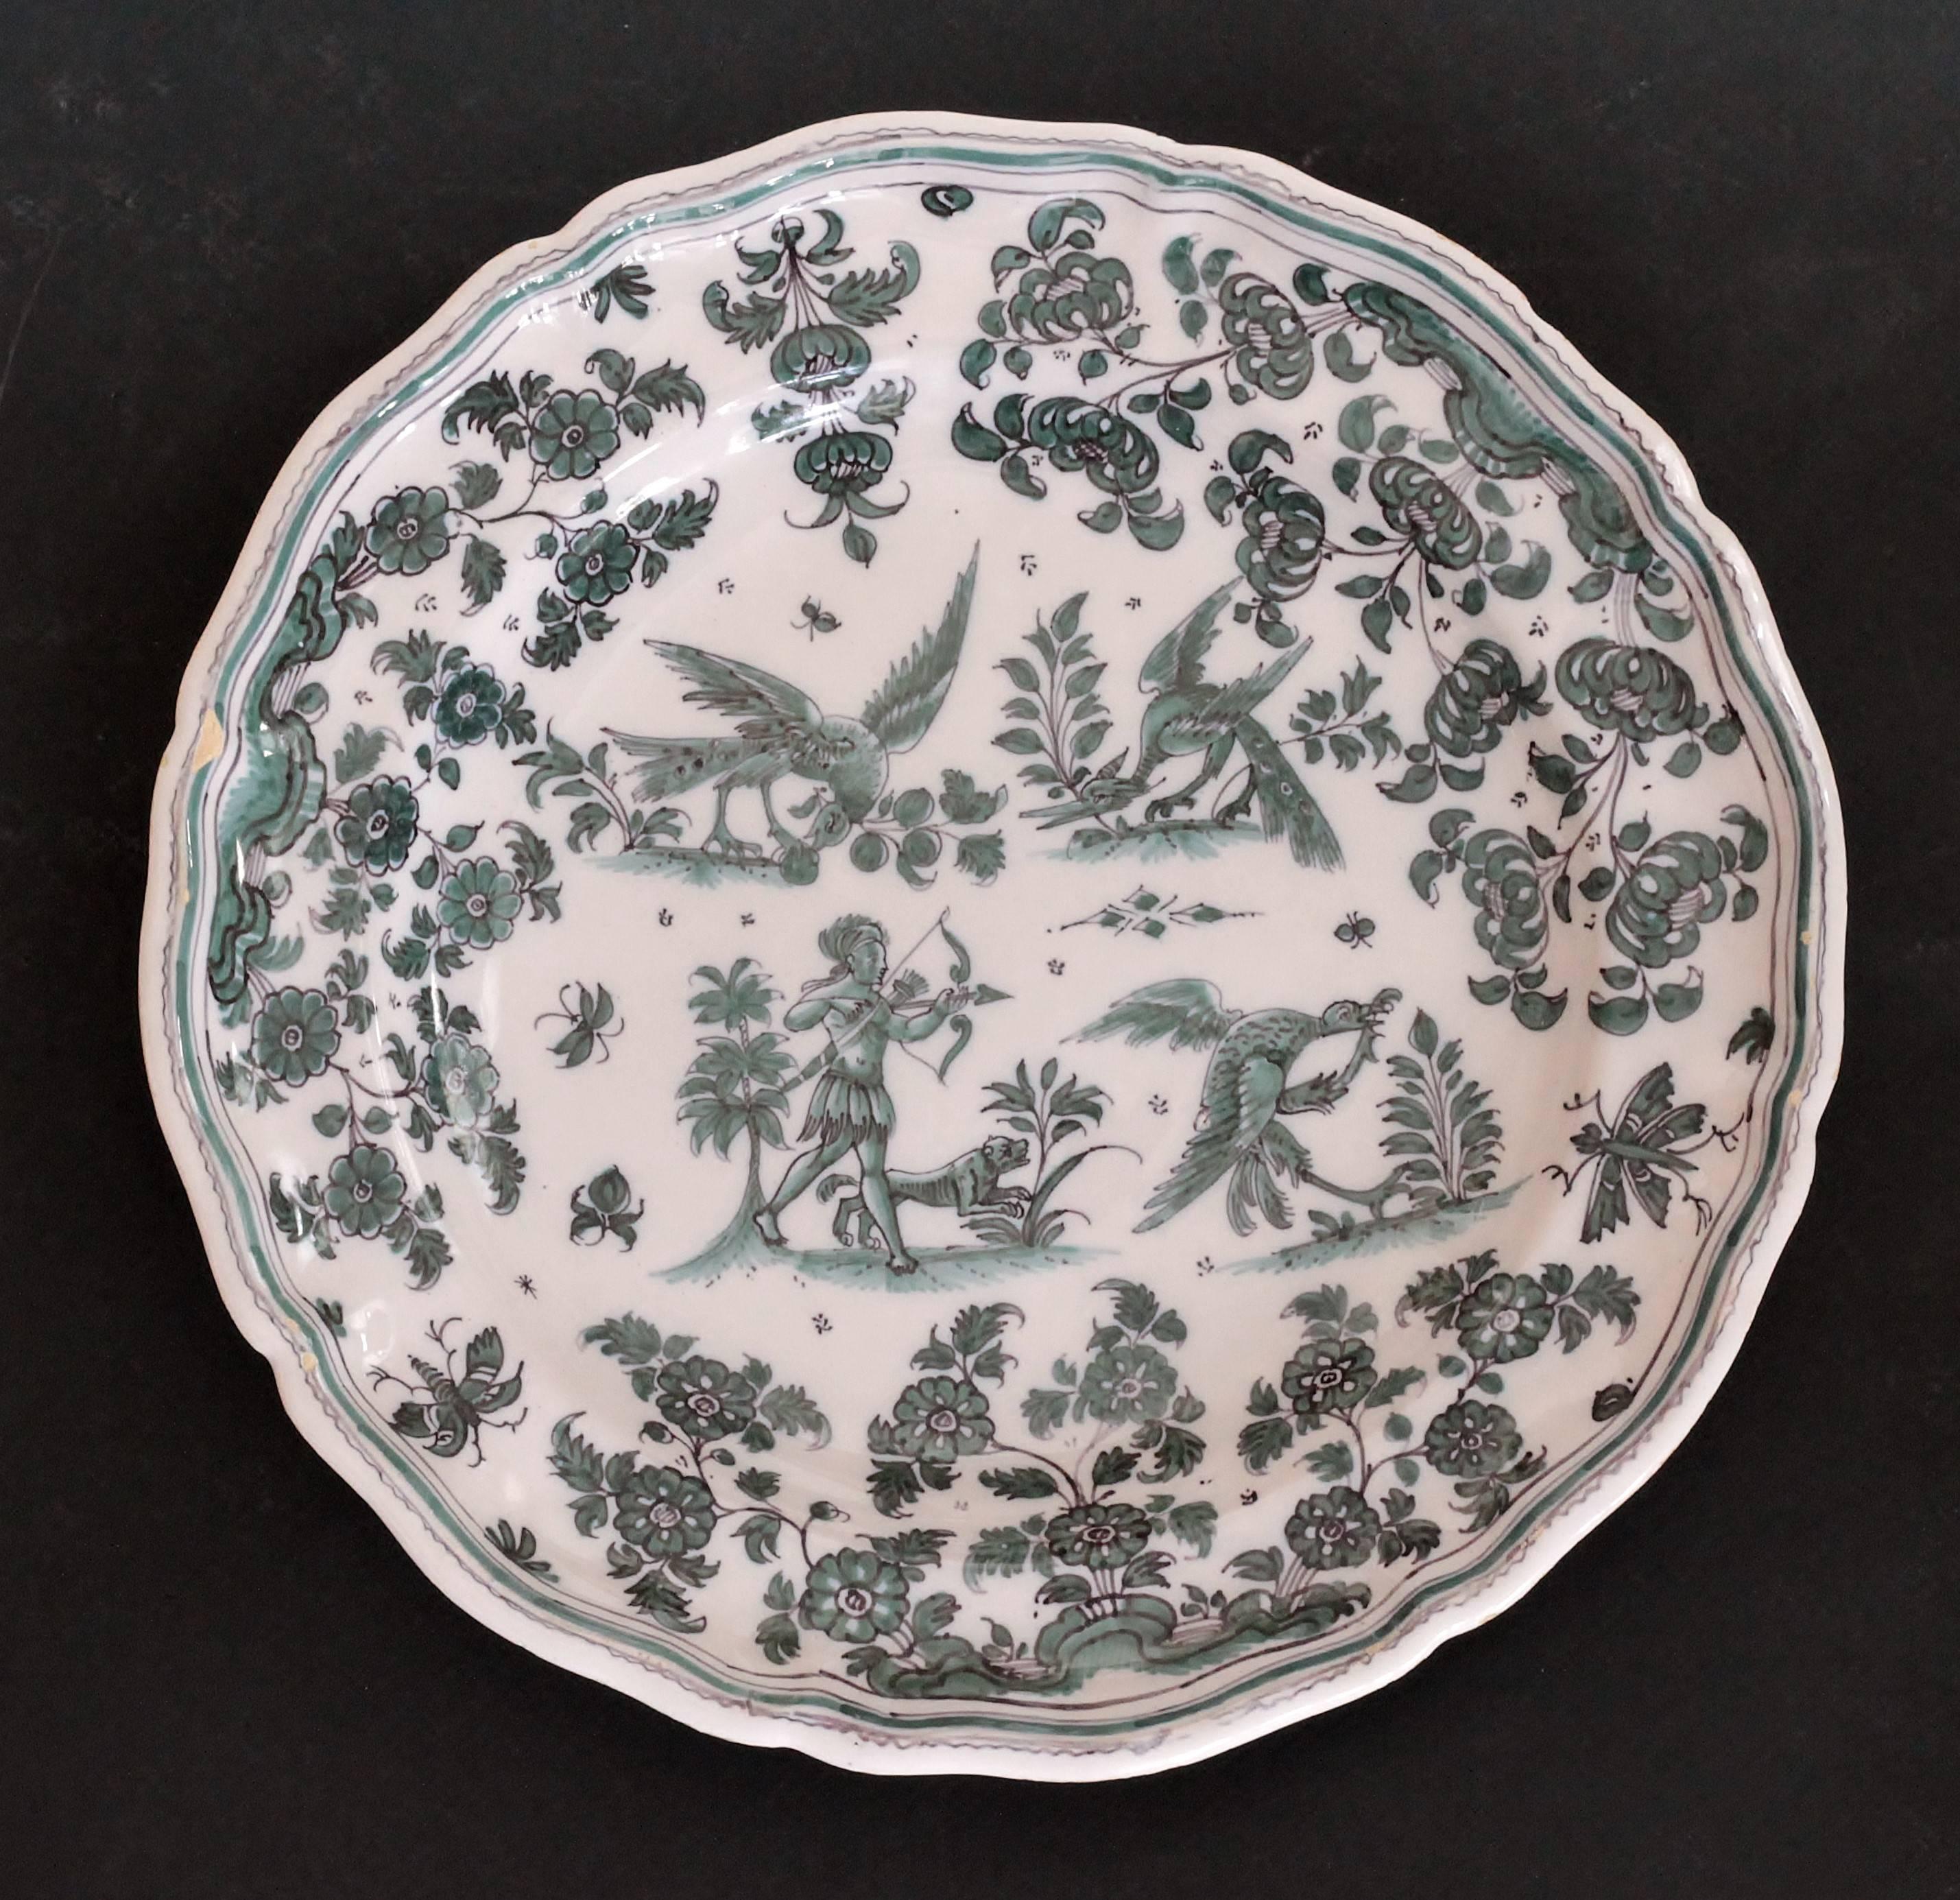 Earthenware plate decorated in shades of green of grotesque fantasy animals on four terraces surrounded by flowers and foliage
Marked: 